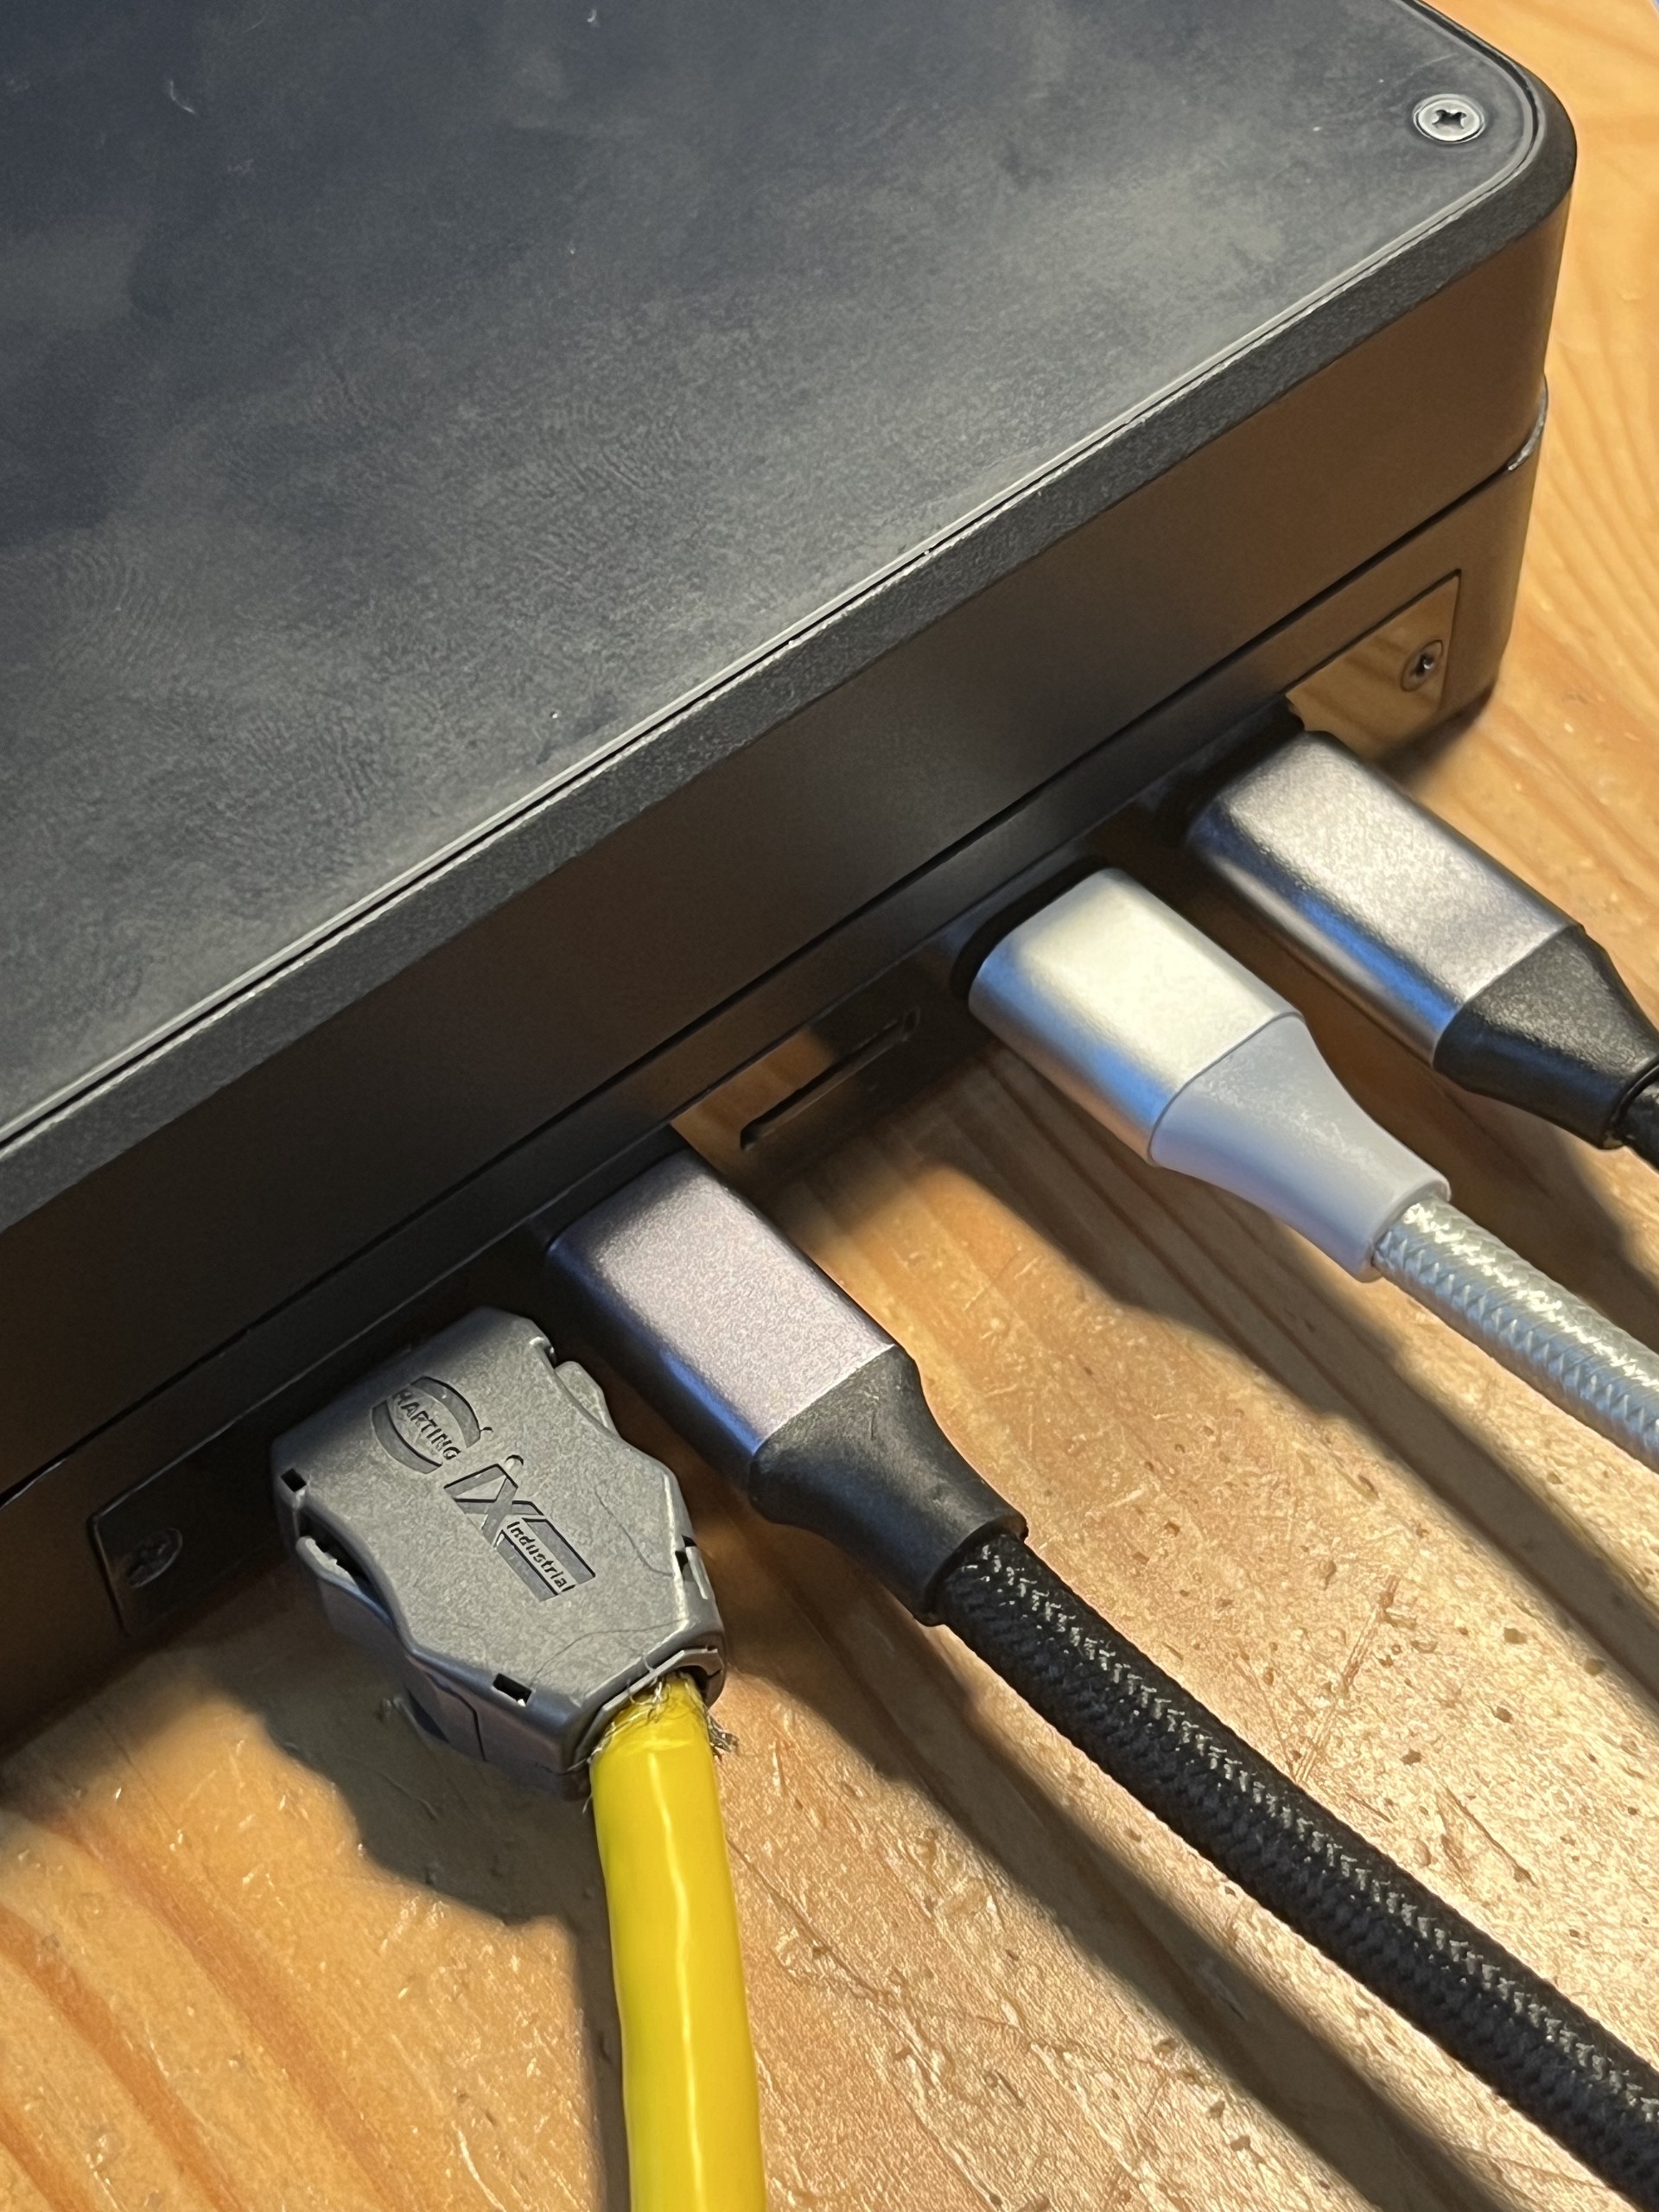 Pocket Reform ports with connected cables